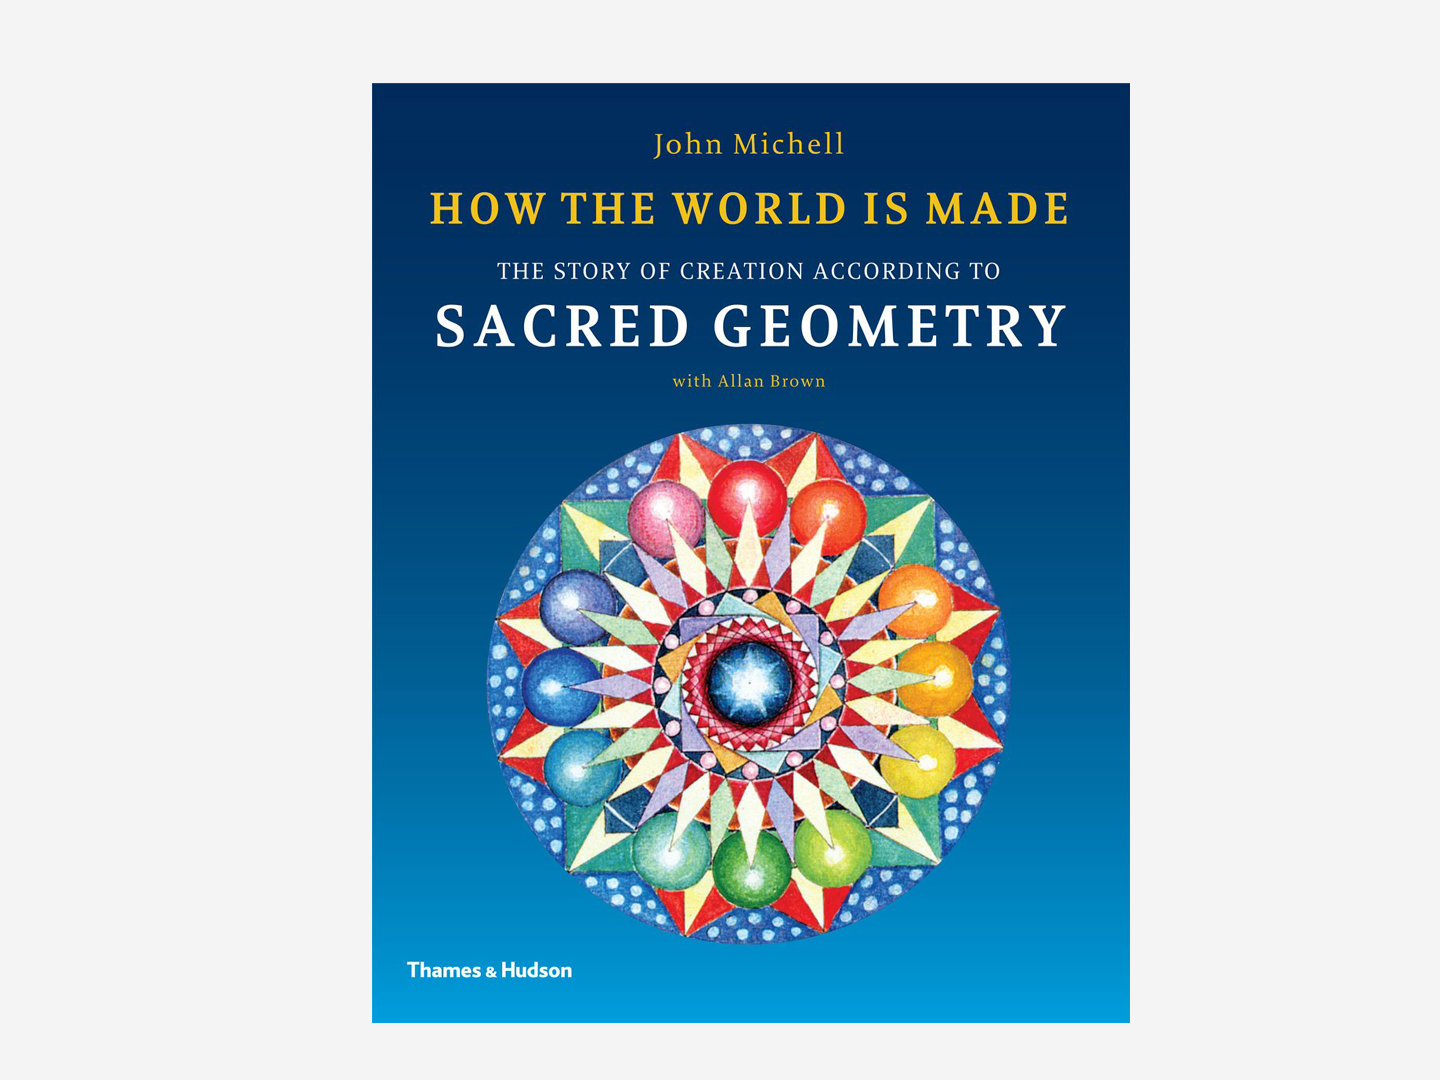 How the World Is Made – The Story of Creation According to Sacred Geometry